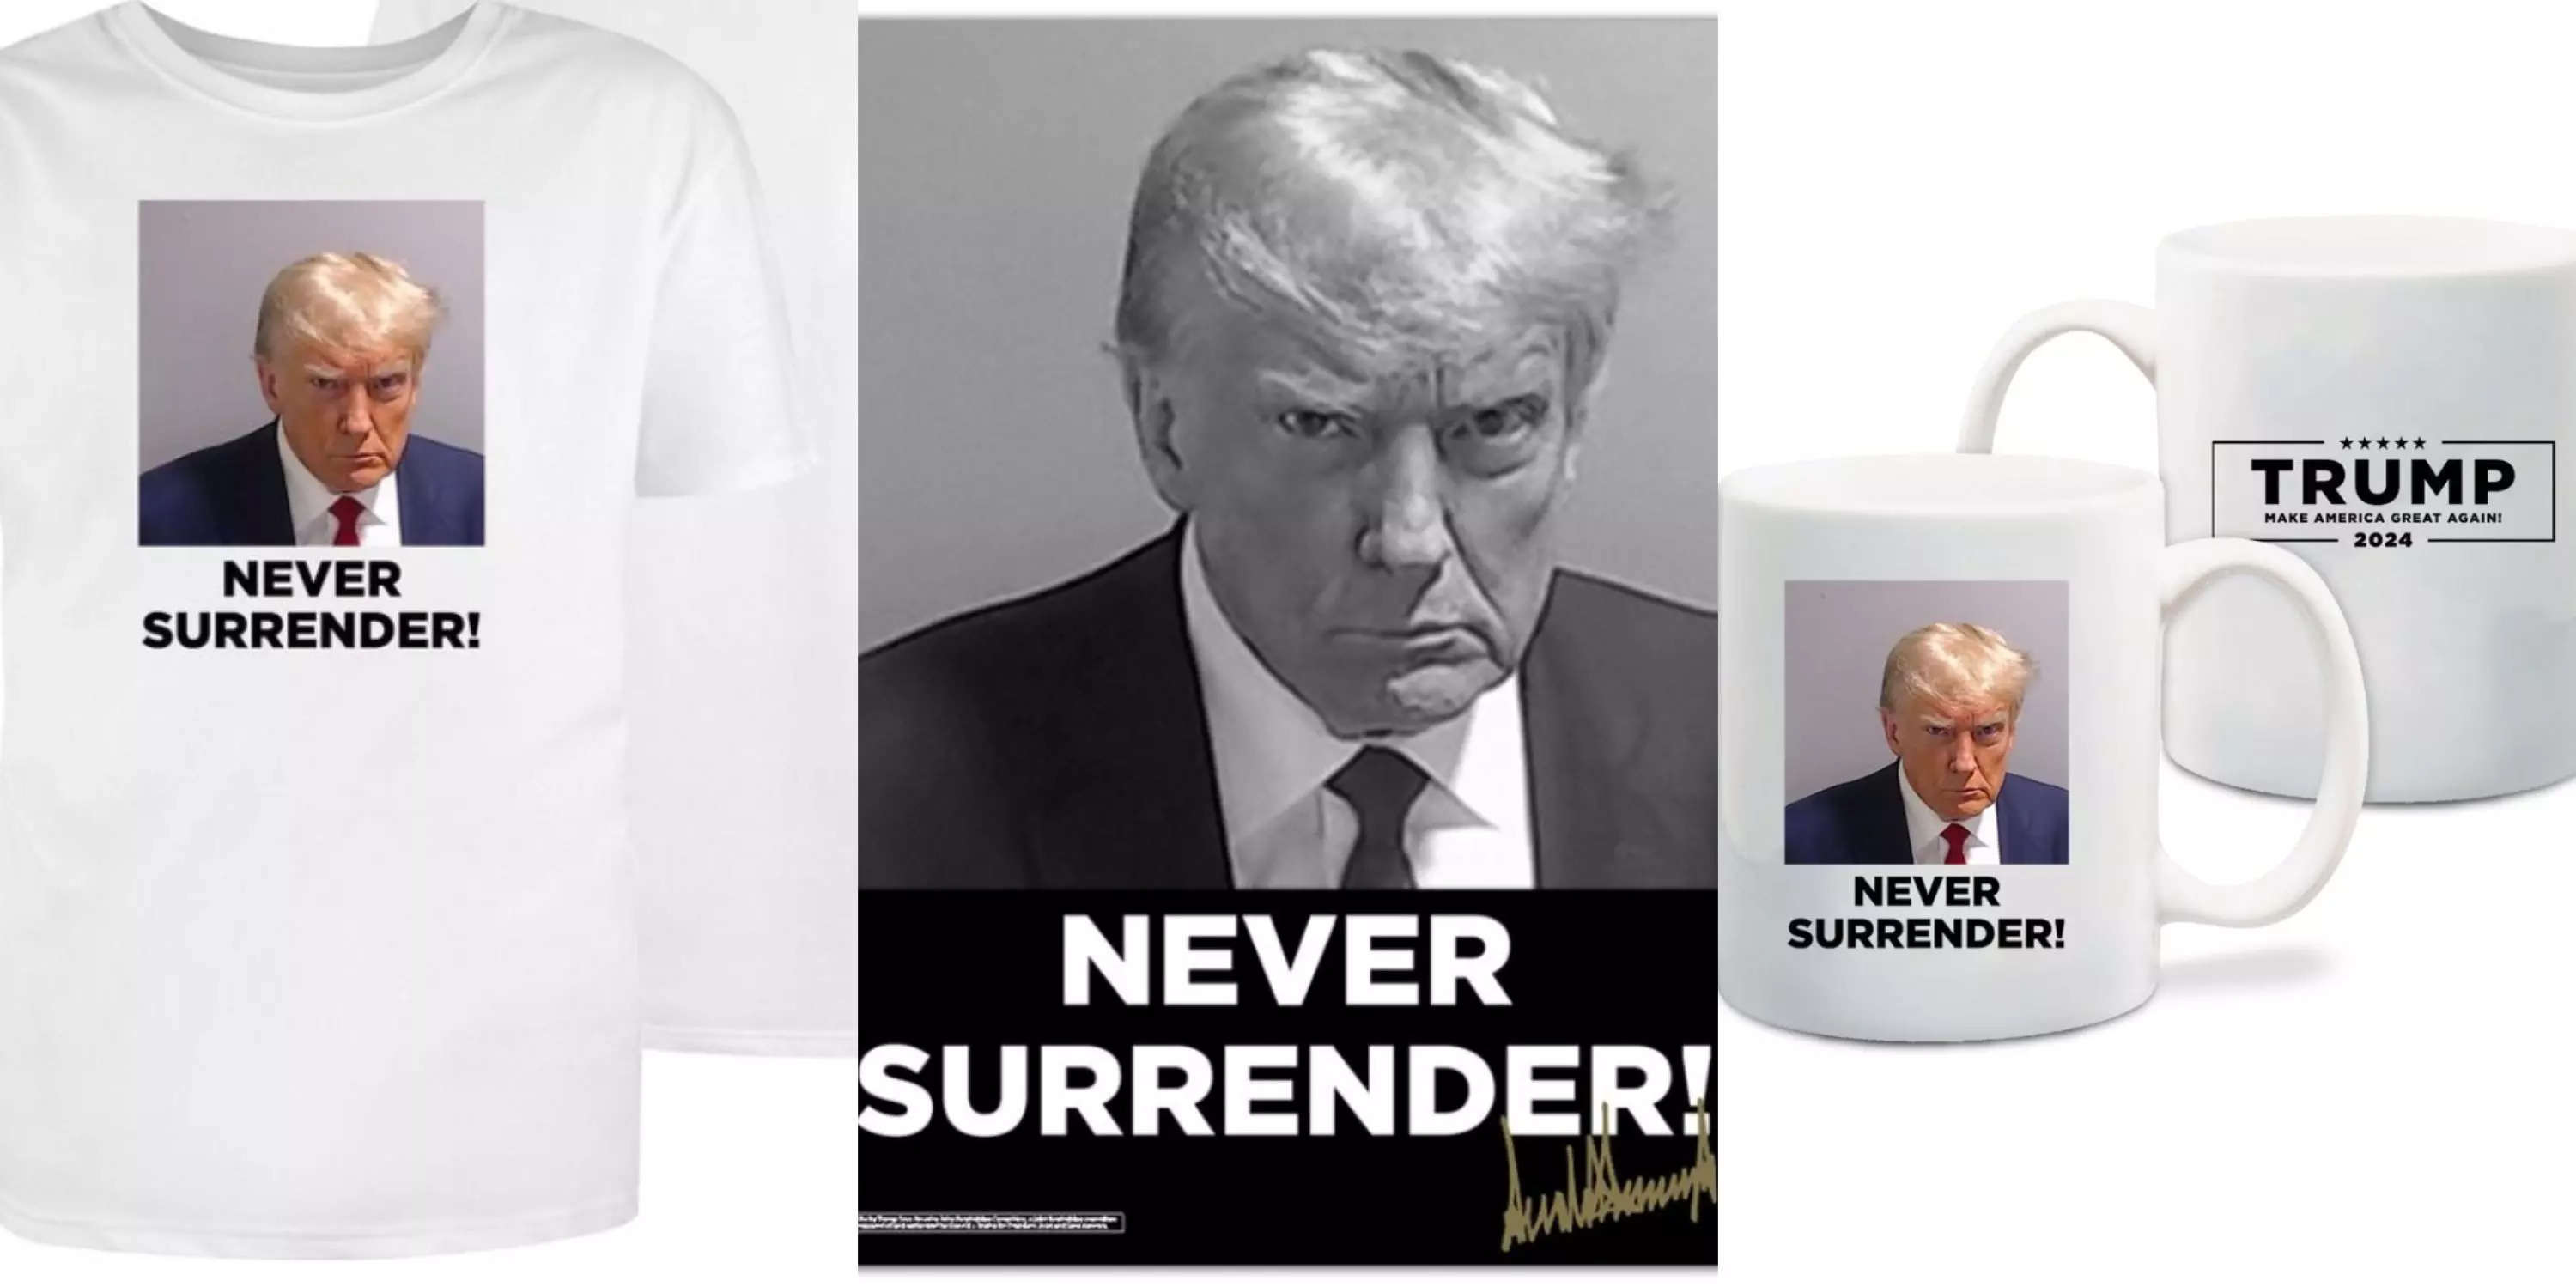 https://www.businessinsider.in/photo/103219993/trump-raked-in-9-4-million-as-his-campaign-sold-tens-of-thousands-of-mugshot-t-shirts-and-coffee-mugs.jpg?imgsize=63068